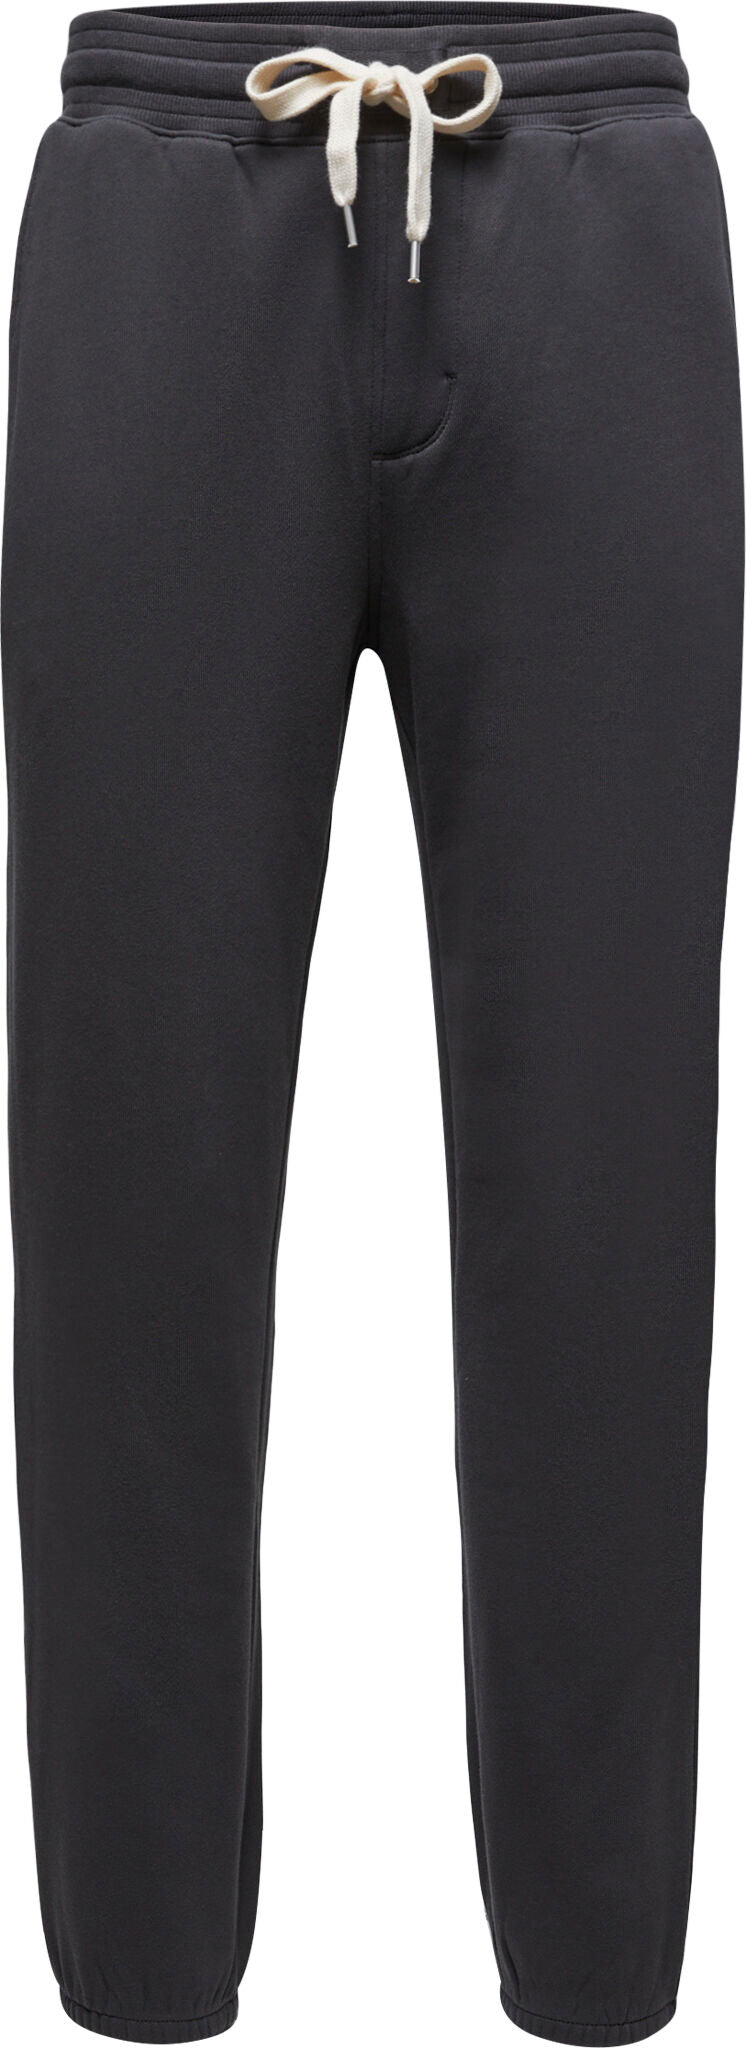 Outerknown All-Day Sweatpants - Men's | Altitude Sports